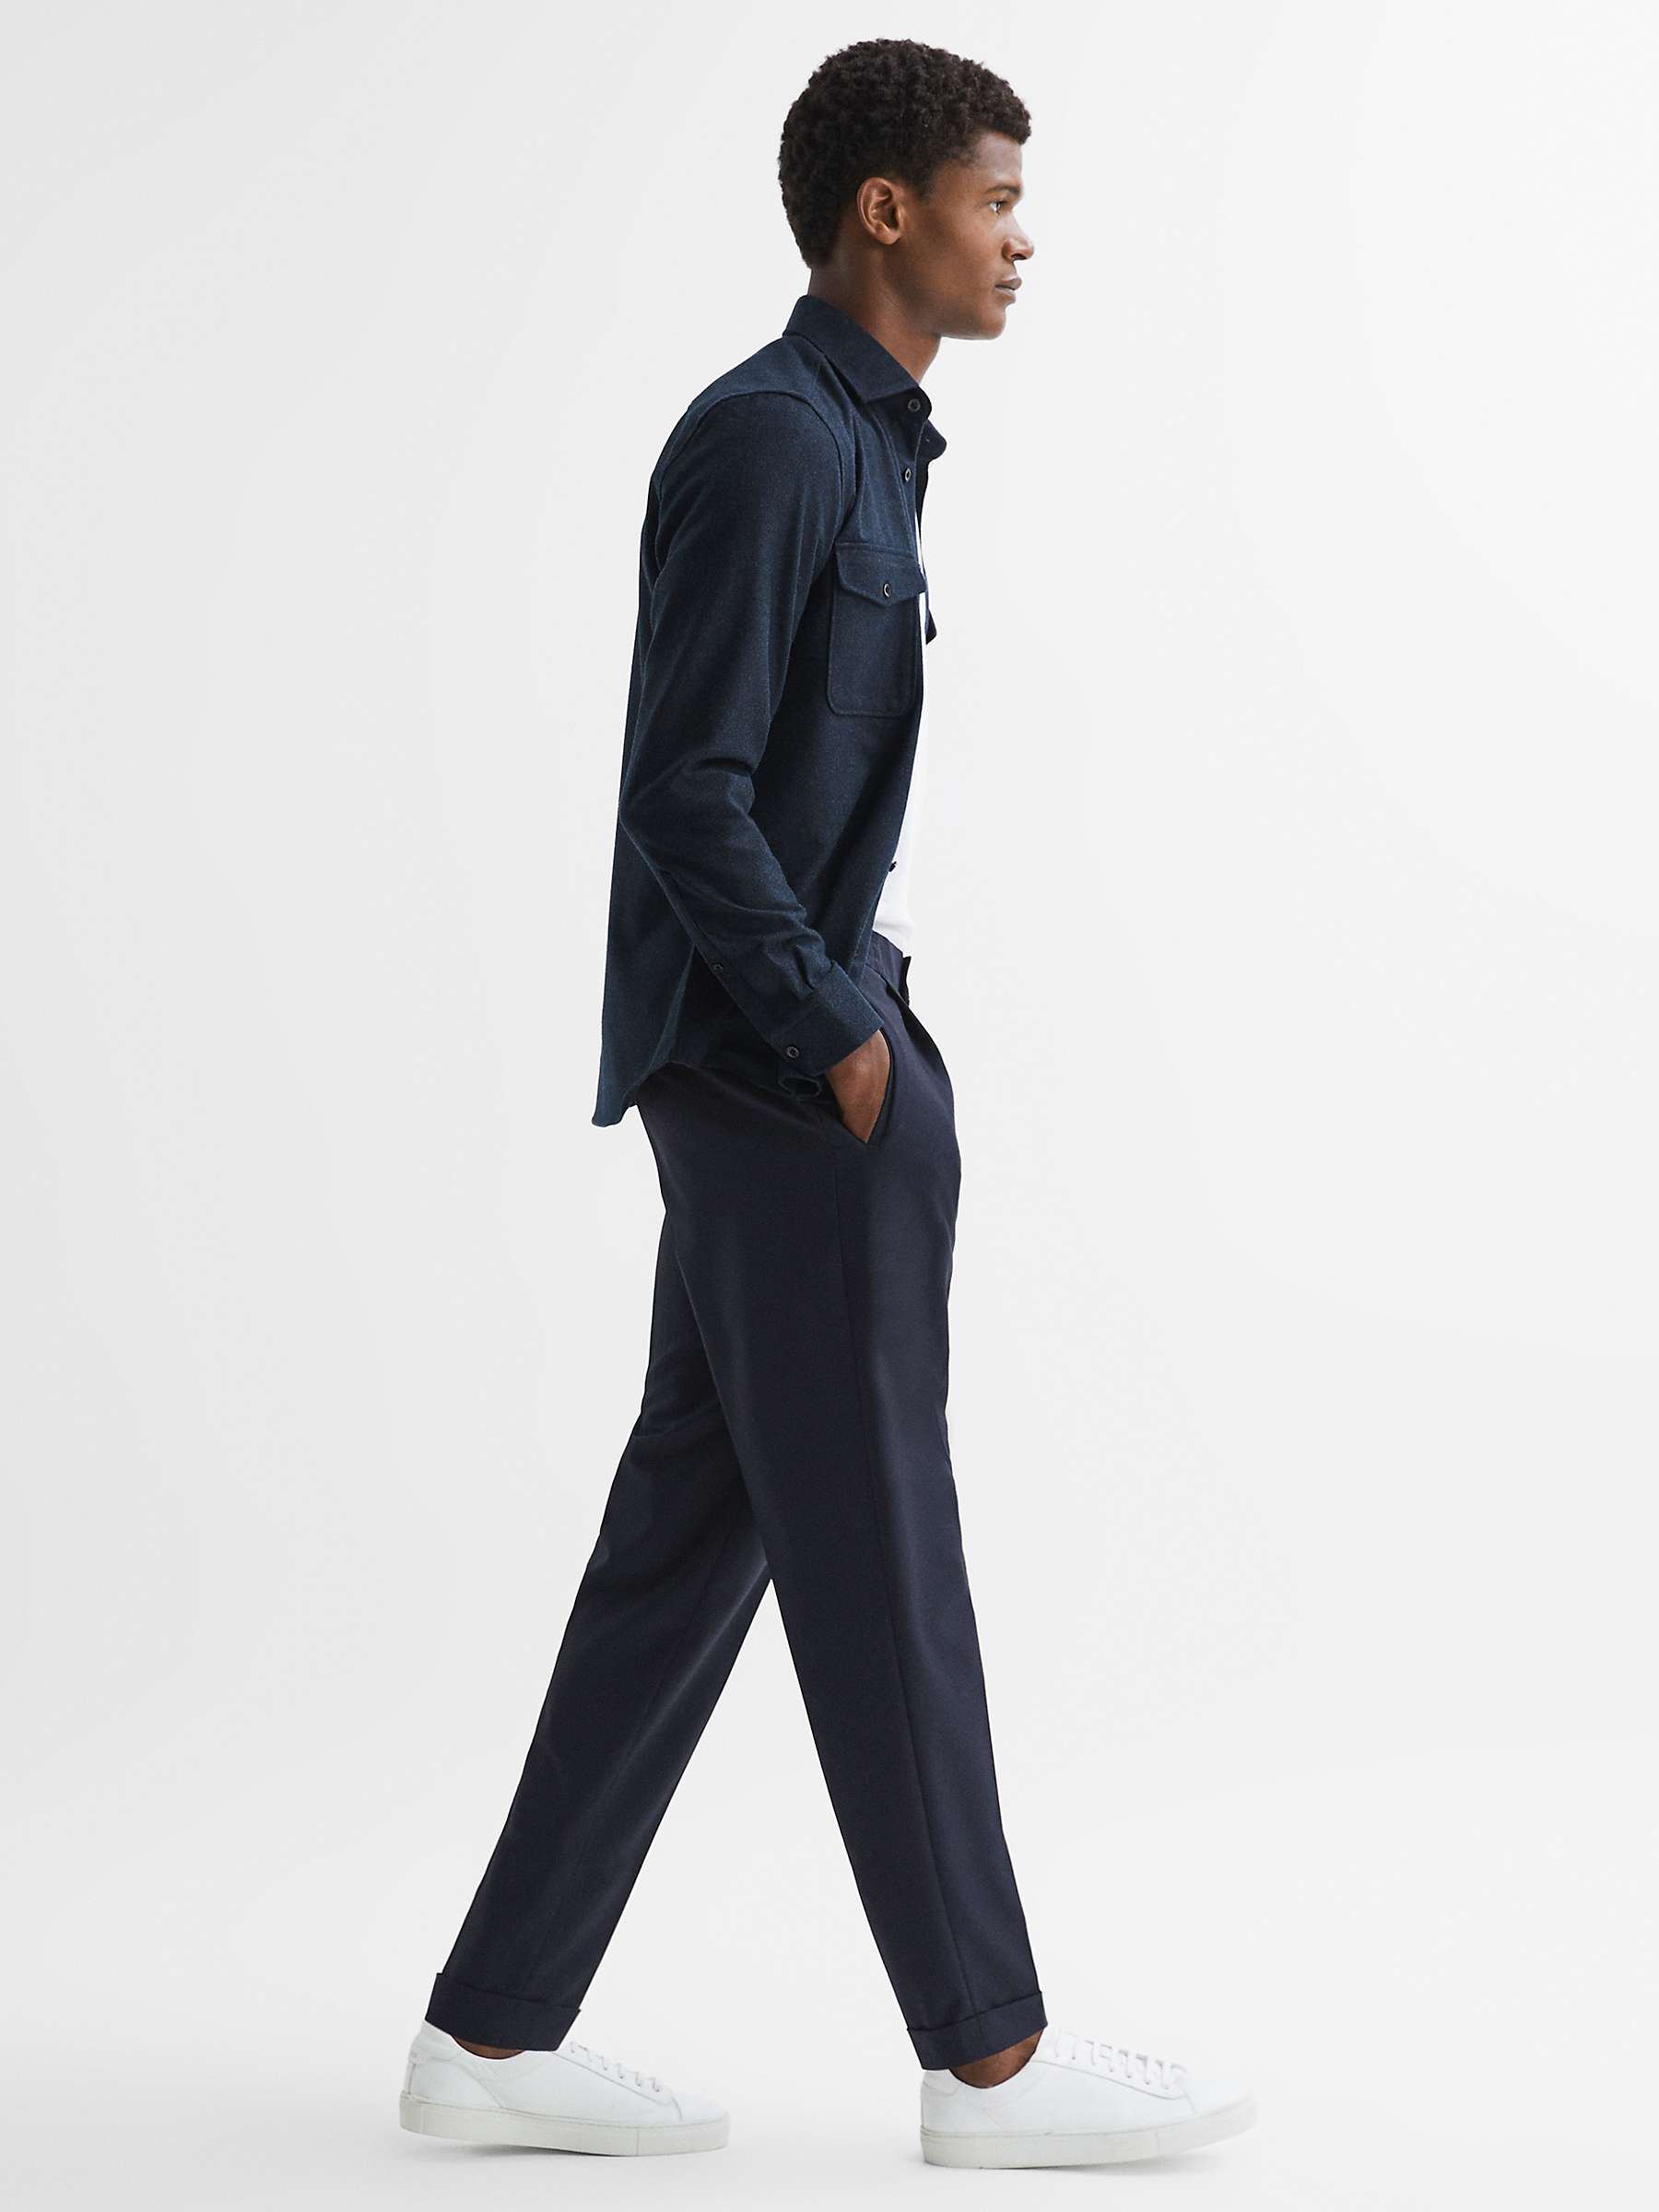 Reiss Chaser Long Sleeve Twin Pocket Shirt, Navy at John Lewis & Partners